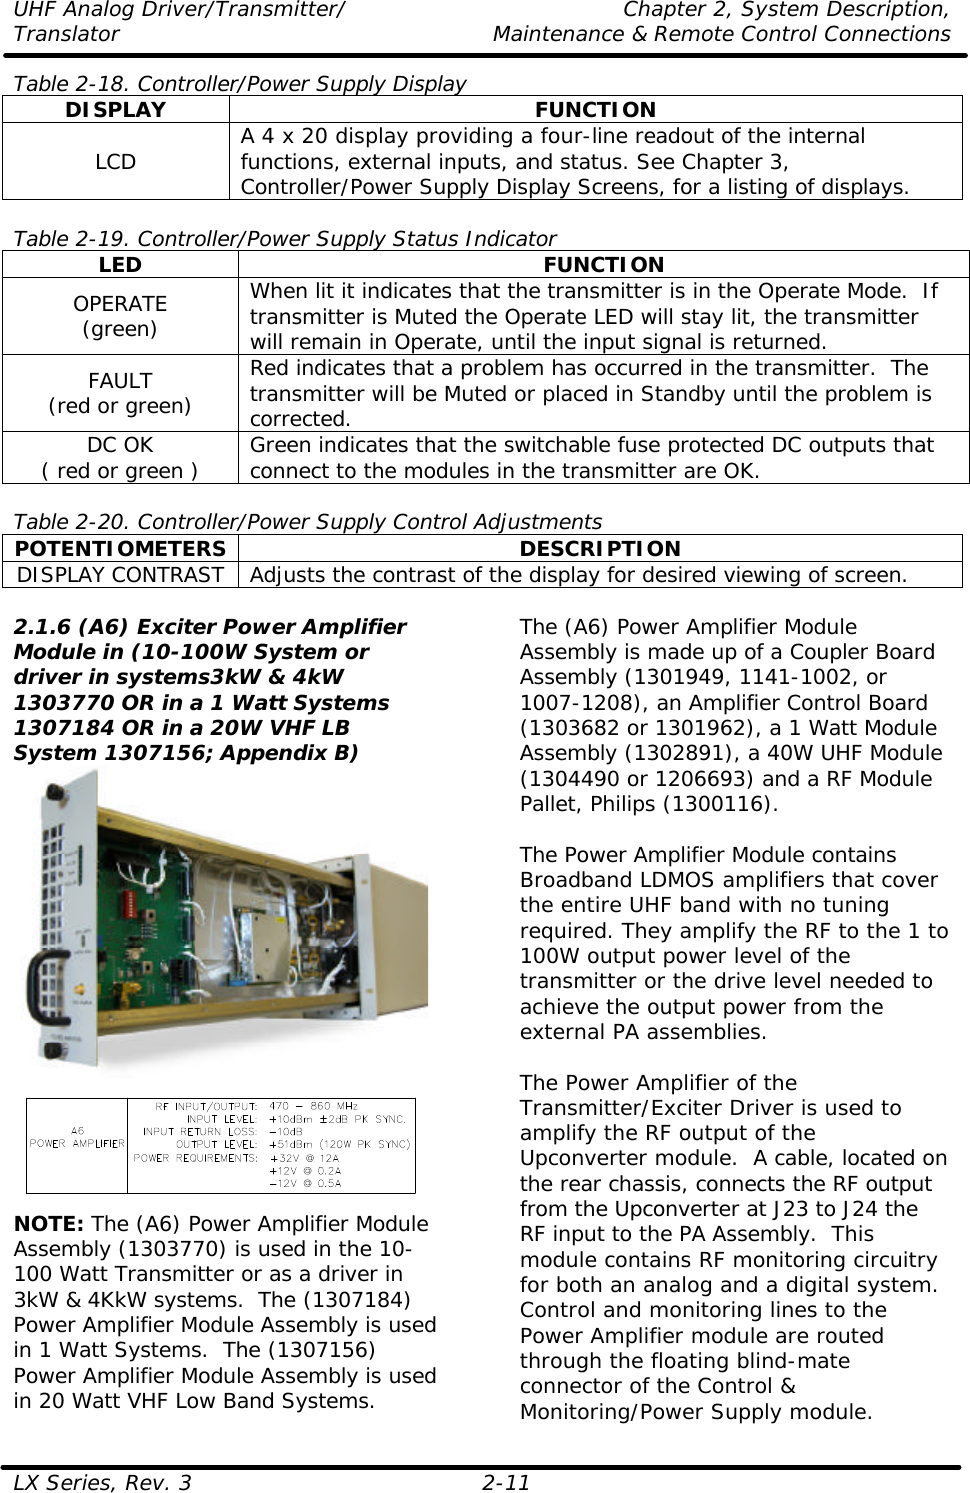 UHF Analog Driver/Transmitter/ Chapter 2, System Description, Translator Maintenance &amp; Remote Control Connections LX Series, Rev. 3 2-11 Table 2-18. Controller/Power Supply Display DISPLAY FUNCTION LCD A 4 x 20 display providing a four-line readout of the internal functions, external inputs, and status. See Chapter 3, Controller/Power Supply Display Screens, for a listing of displays.  Table 2-19. Controller/Power Supply Status Indicator LED FUNCTION OPERATE (green) When lit it indicates that the transmitter is in the Operate Mode.  If transmitter is Muted the Operate LED will stay lit, the transmitter will remain in Operate, until the input signal is returned. FAULT (red or green) Red indicates that a problem has occurred in the transmitter.  The transmitter will be Muted or placed in Standby until the problem is corrected. DC OK ( red or green ) Green indicates that the switchable fuse protected DC outputs that connect to the modules in the transmitter are OK.  Table 2-20. Controller/Power Supply Control Adjustments POTENTIOMETERS DESCRIPTION DISPLAY CONTRAST Adjusts the contrast of the display for desired viewing of screen.  2.1.6 (A6) Exciter Power Amplifier Module in (10-100W System or driver in systems3kW &amp; 4kW 1303770 OR in a 1 Watt Systems 1307184 OR in a 20W VHF LB System 1307156; Appendix B)  NOTE: The (A6) Power Amplifier Module Assembly (1303770) is used in the 10-100 Watt Transmitter or as a driver in 3kW &amp; 4KkW systems.  The (1307184) Power Amplifier Module Assembly is used in 1 Watt Systems.  The (1307156) Power Amplifier Module Assembly is used in 20 Watt VHF Low Band Systems.  The (A6) Power Amplifier Module Assembly is made up of a Coupler Board Assembly (1301949, 1141-1002, or 1007-1208), an Amplifier Control Board (1303682 or 1301962), a 1 Watt Module Assembly (1302891), a 40W UHF Module (1304490 or 1206693) and a RF Module Pallet, Philips (1300116).  The Power Amplifier Module contains Broadband LDMOS amplifiers that cover the entire UHF band with no tuning required. They amplify the RF to the 1 to 100W output power level of the transmitter or the drive level needed to achieve the output power from the external PA assemblies.  The Power Amplifier of the Transmitter/Exciter Driver is used to amplify the RF output of the Upconverter module.  A cable, located on the rear chassis, connects the RF output from the Upconverter at J23 to J24 the RF input to the PA Assembly.  This module contains RF monitoring circuitry for both an analog and a digital system.  Control and monitoring lines to the Power Amplifier module are routed through the floating blind-mate connector of the Control &amp; Monitoring/Power Supply module.  